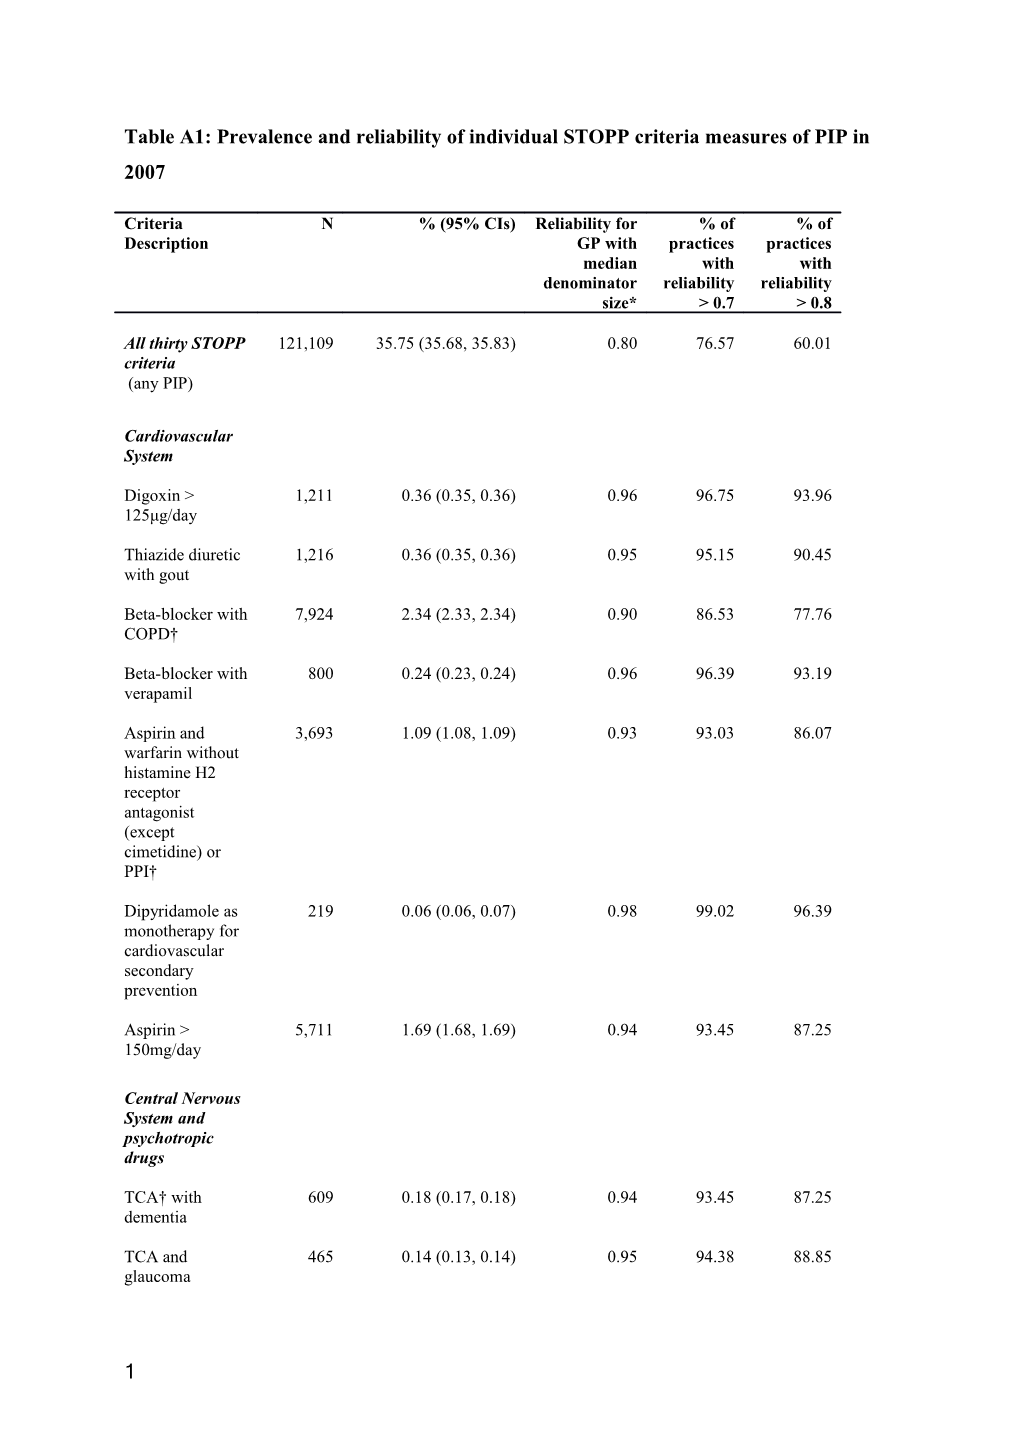 Table A1: Prevalence and Reliability of Individual STOPP Criteria Measures of PIP in 2007